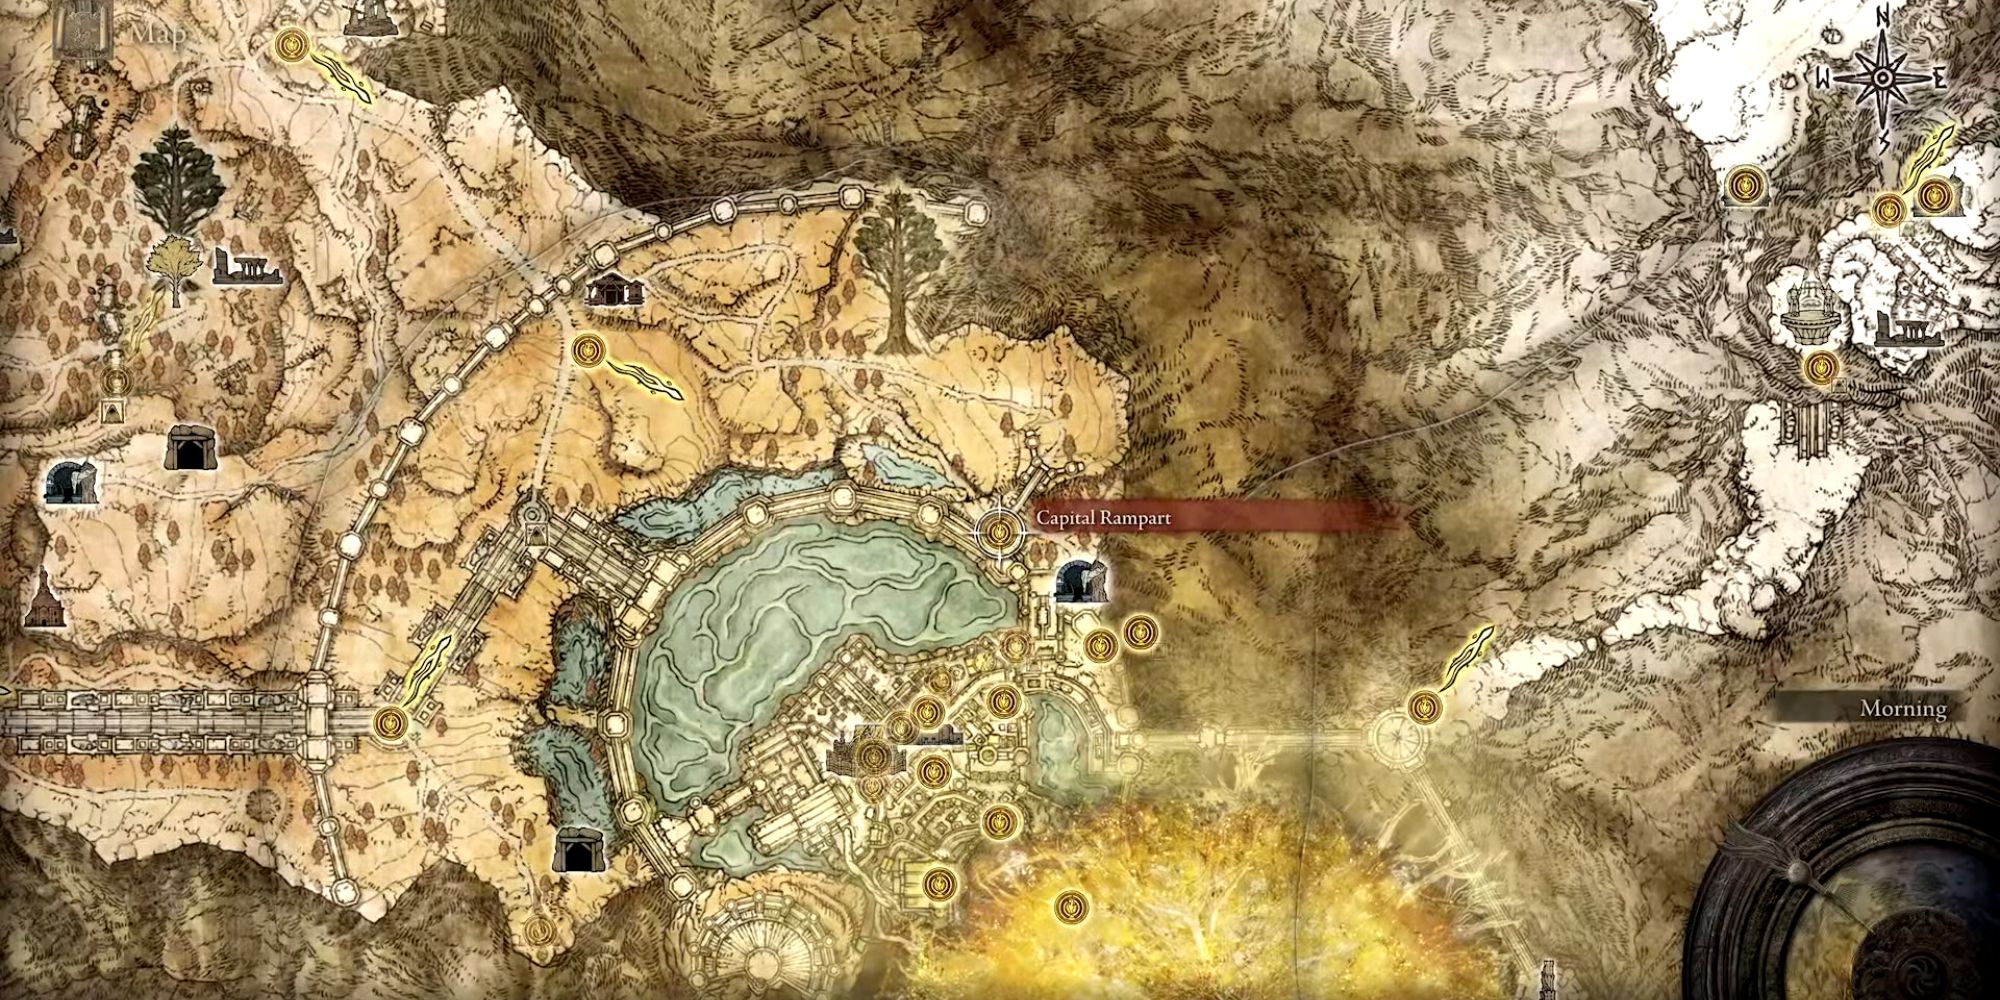 Capital Rampart on the elden ring map